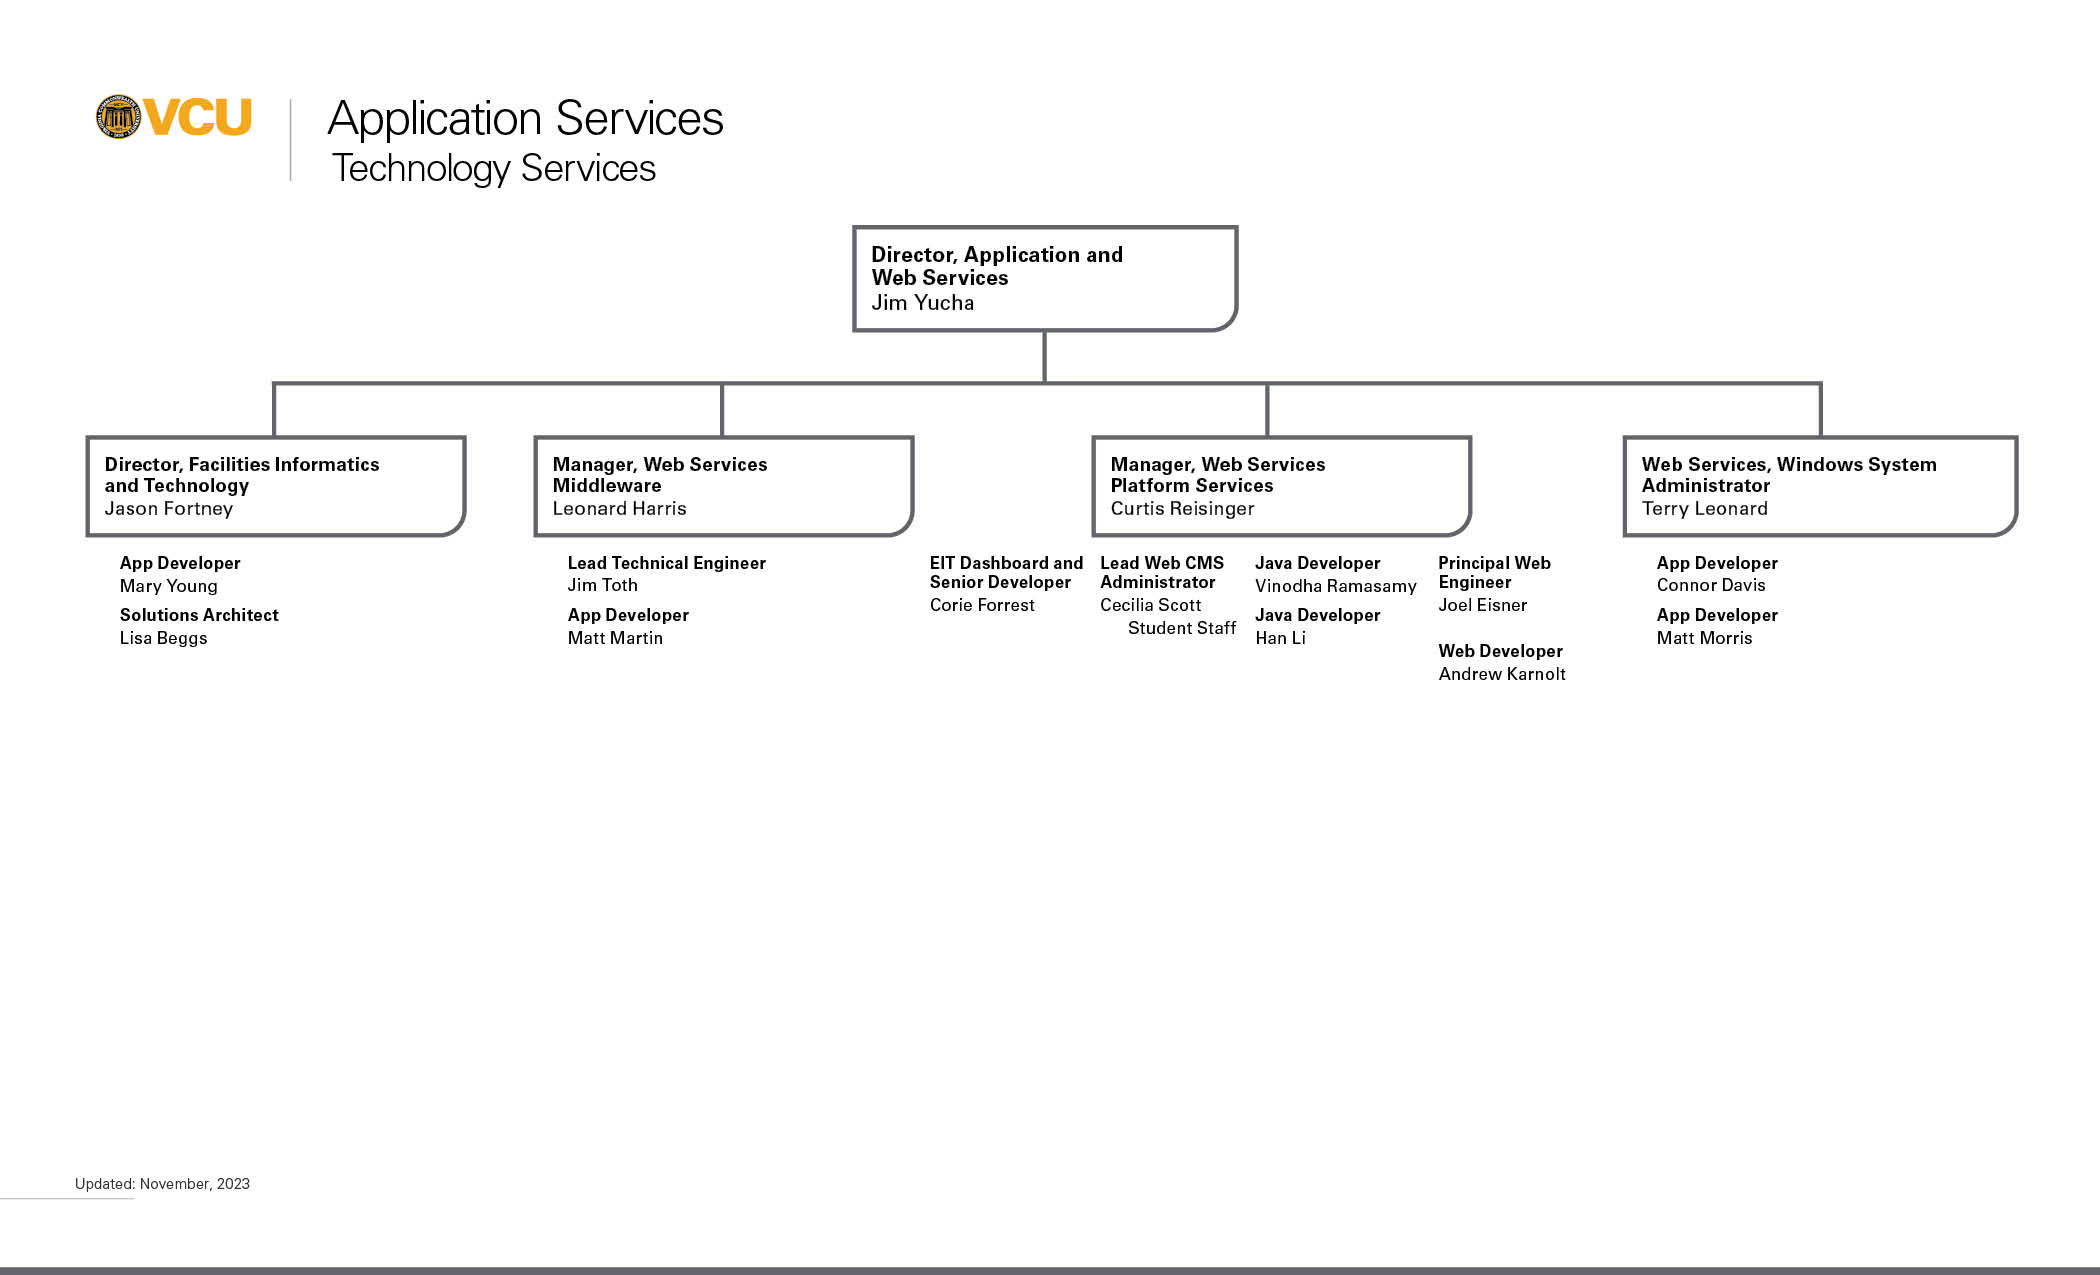 Application Services Org Chart